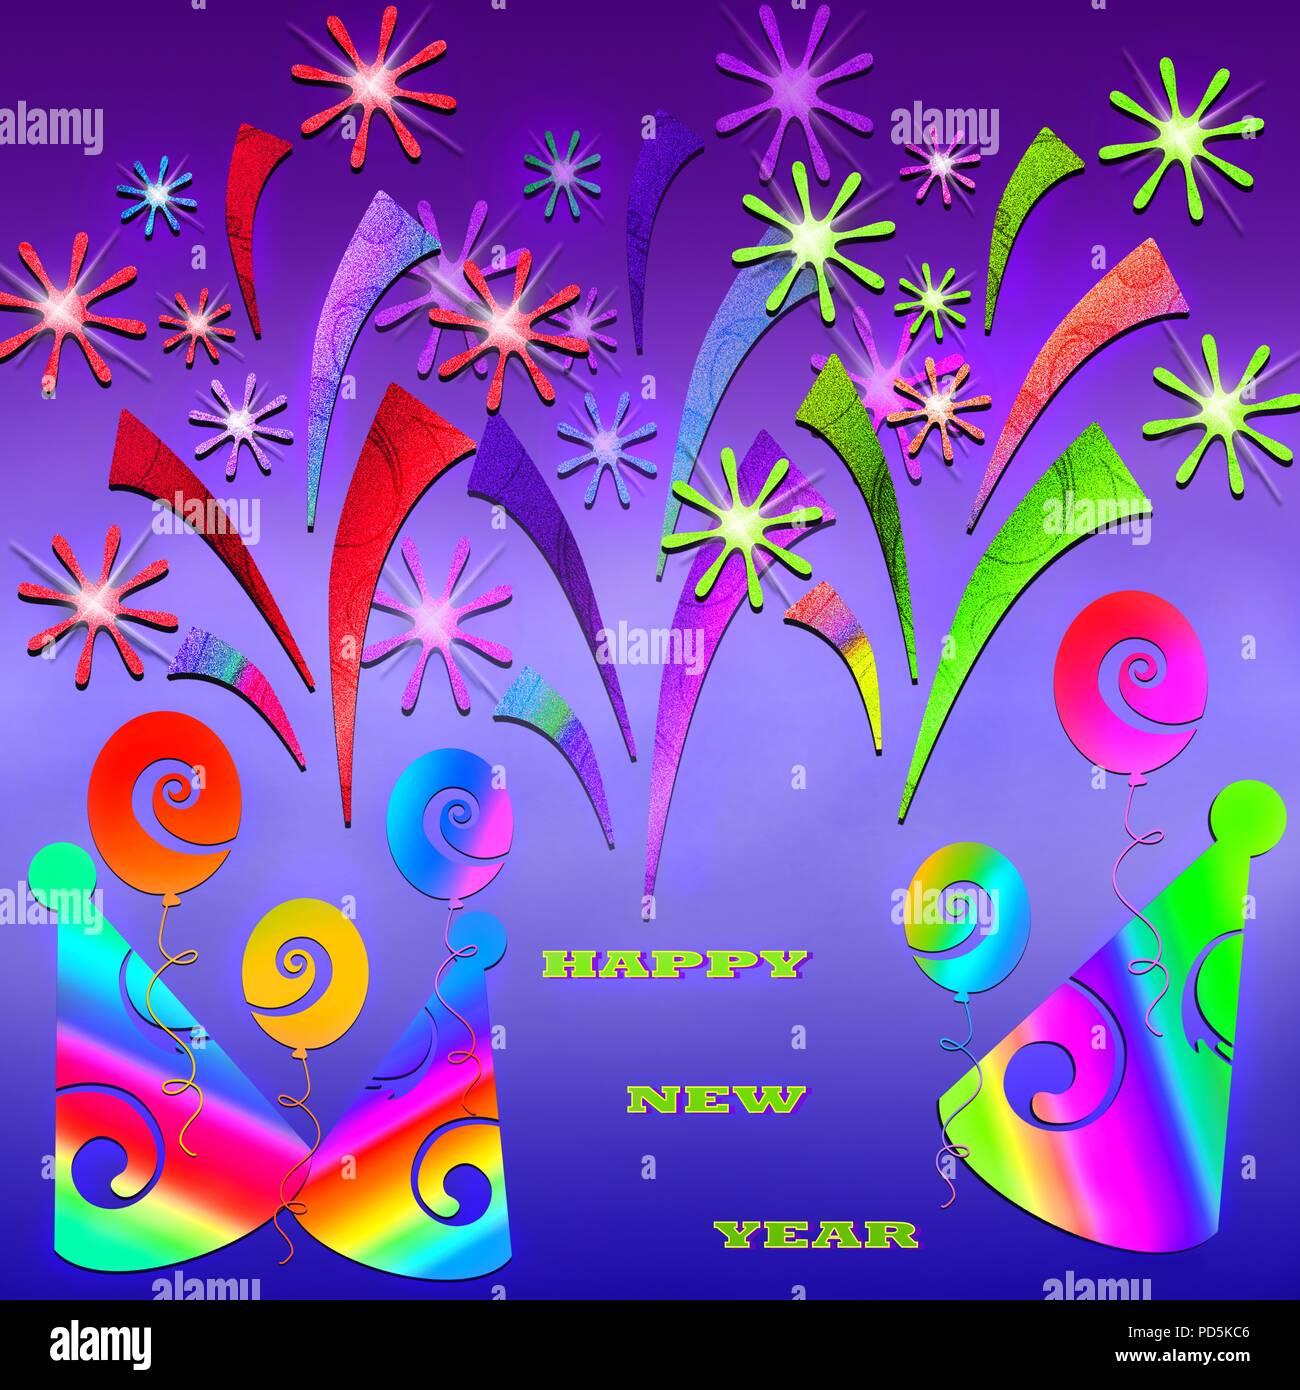 Rockets, fireworks, blow ticklers, party hats and balloons ring in the new year. Stock Photo